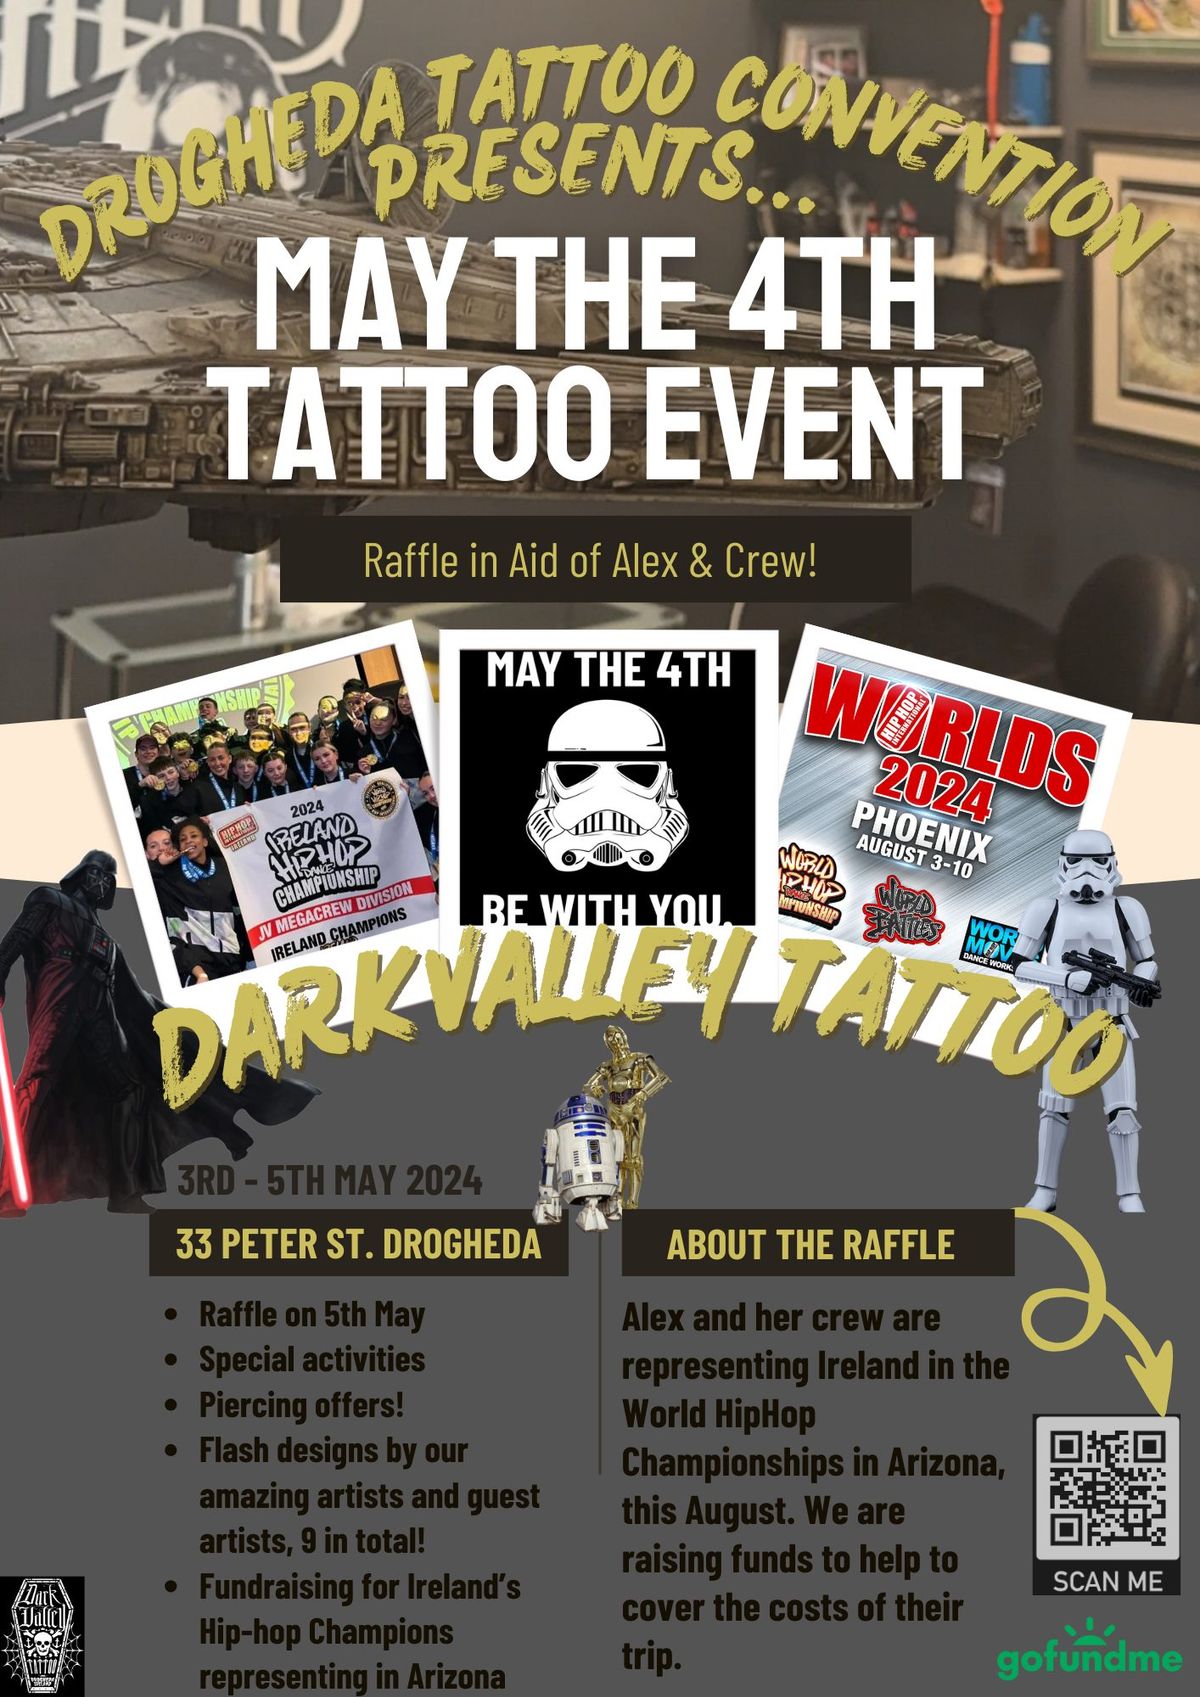 May the 4th Tattoo Event Weekend